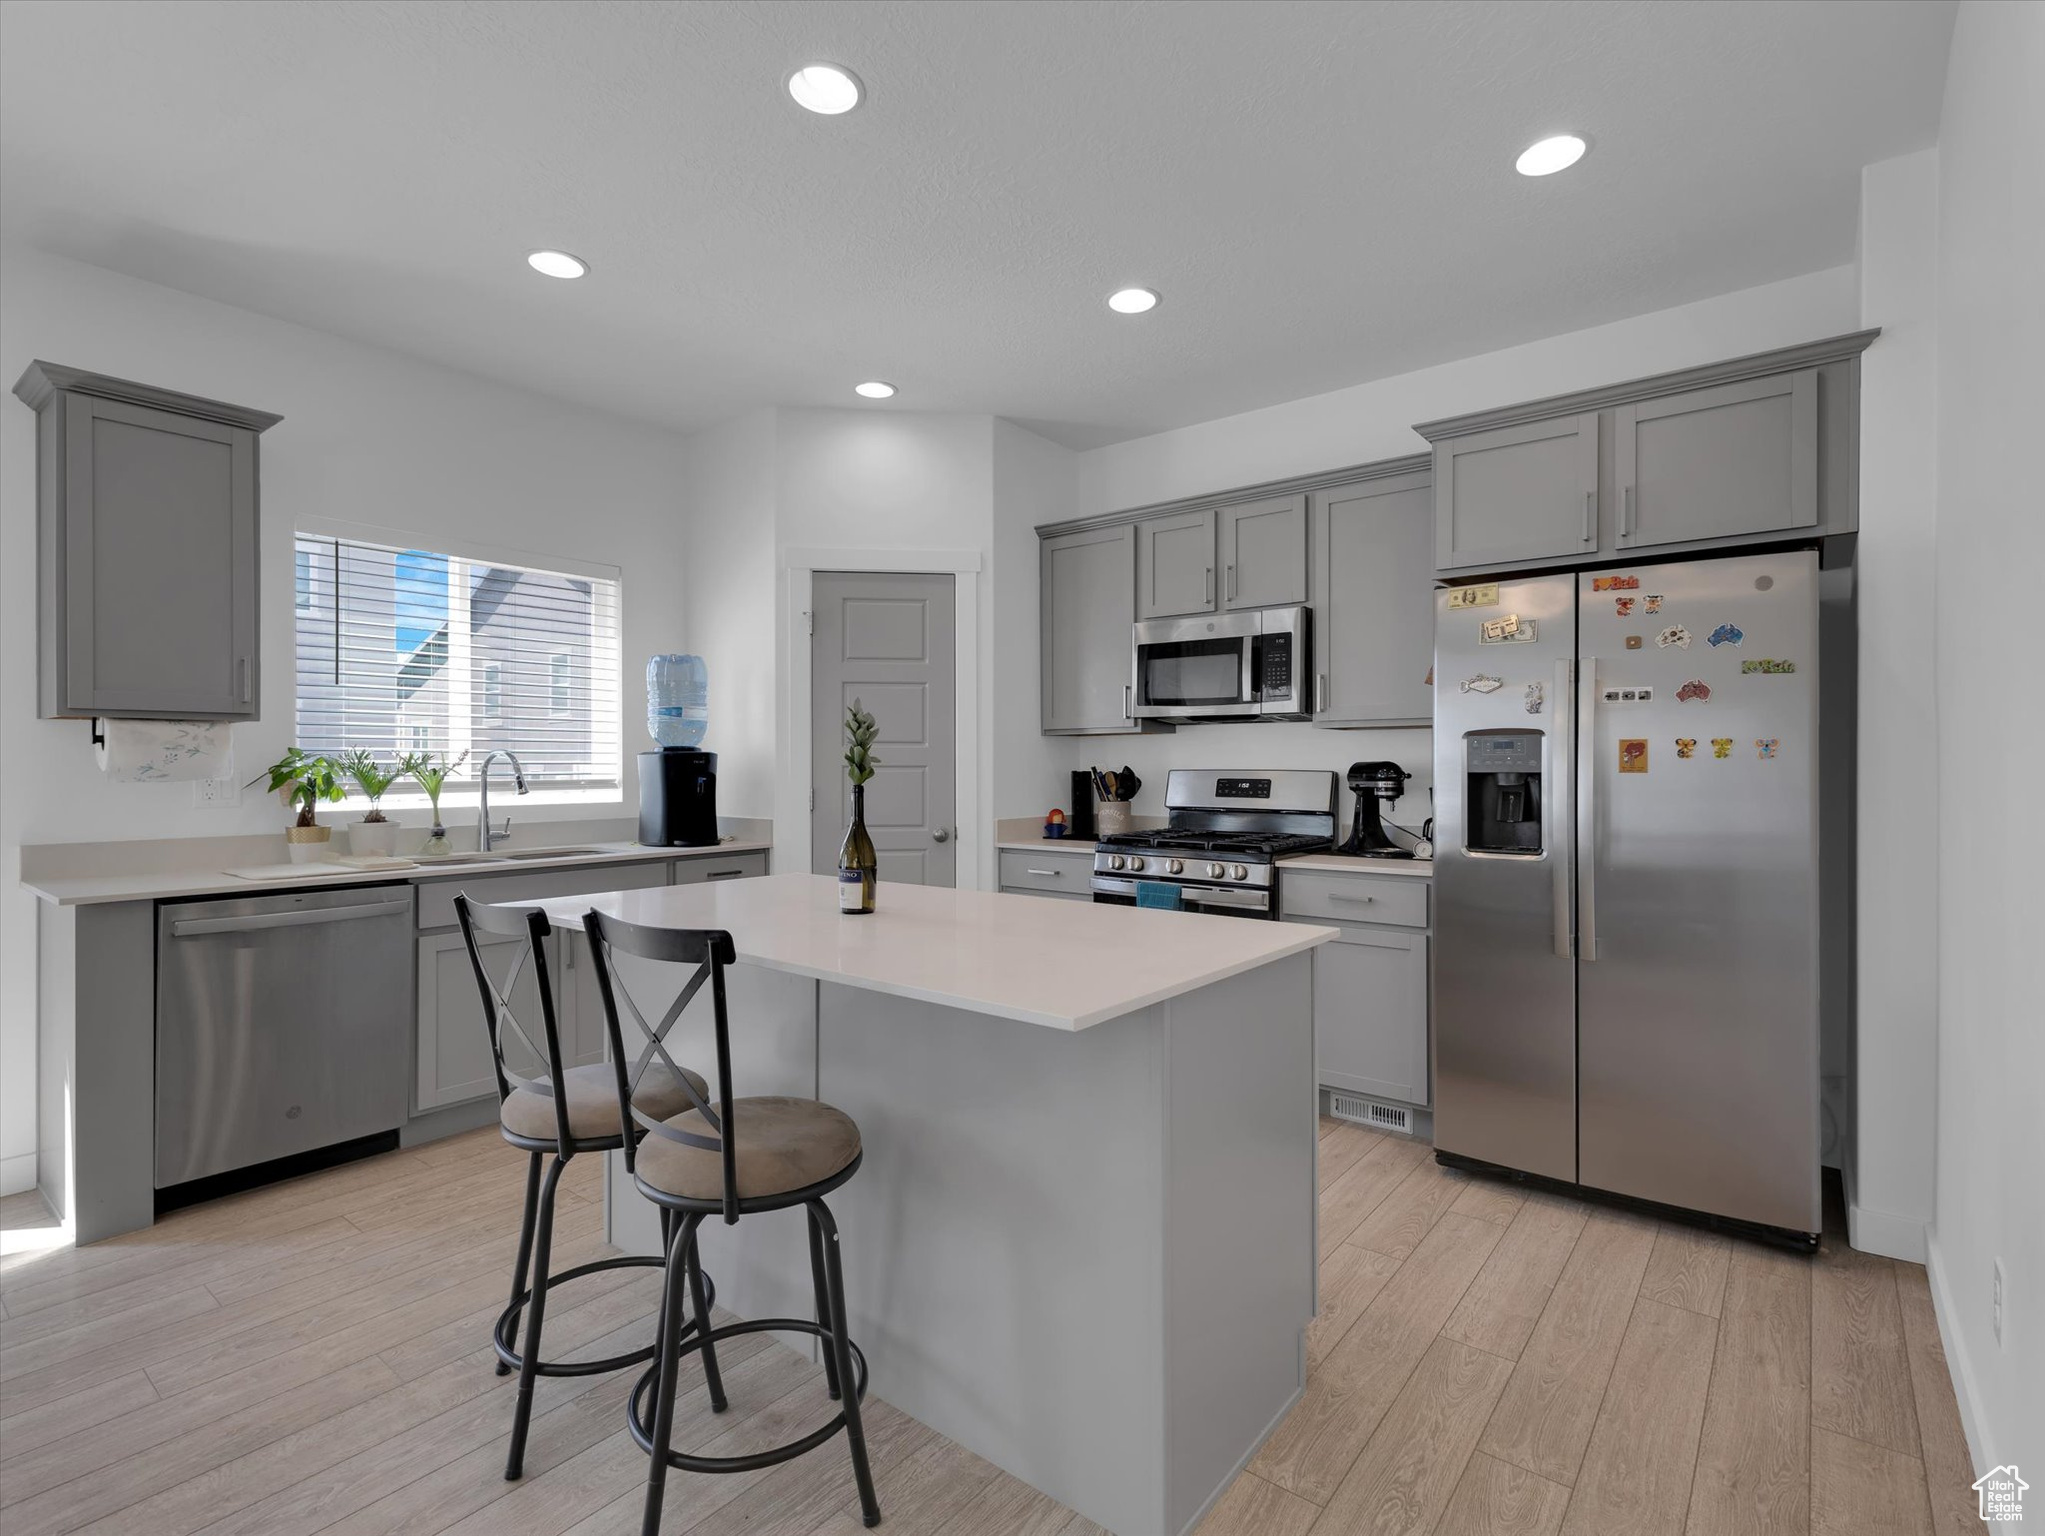 Kitchen featuring a kitchen island, gray cabinetry, appliances with stainless steel finishes, and light wood-type flooring